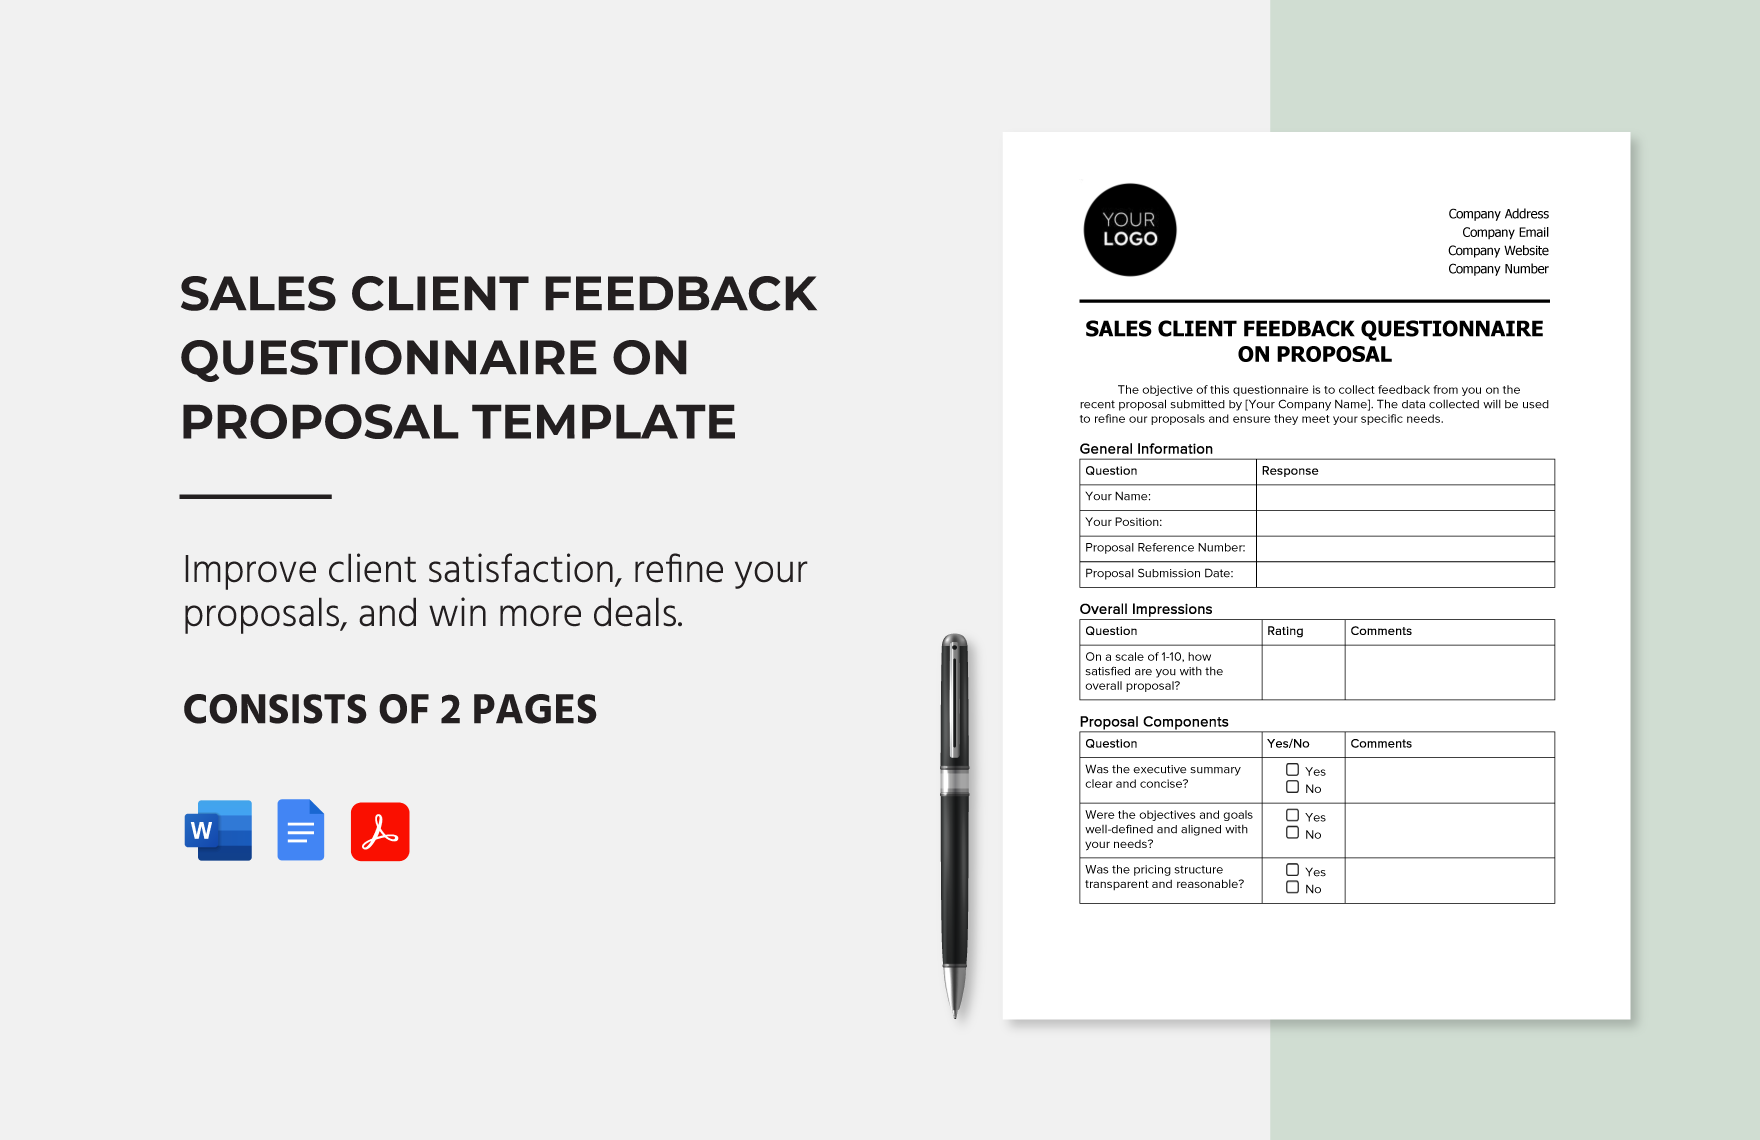 Sales Client Feedback Questionnaire on Proposal Template